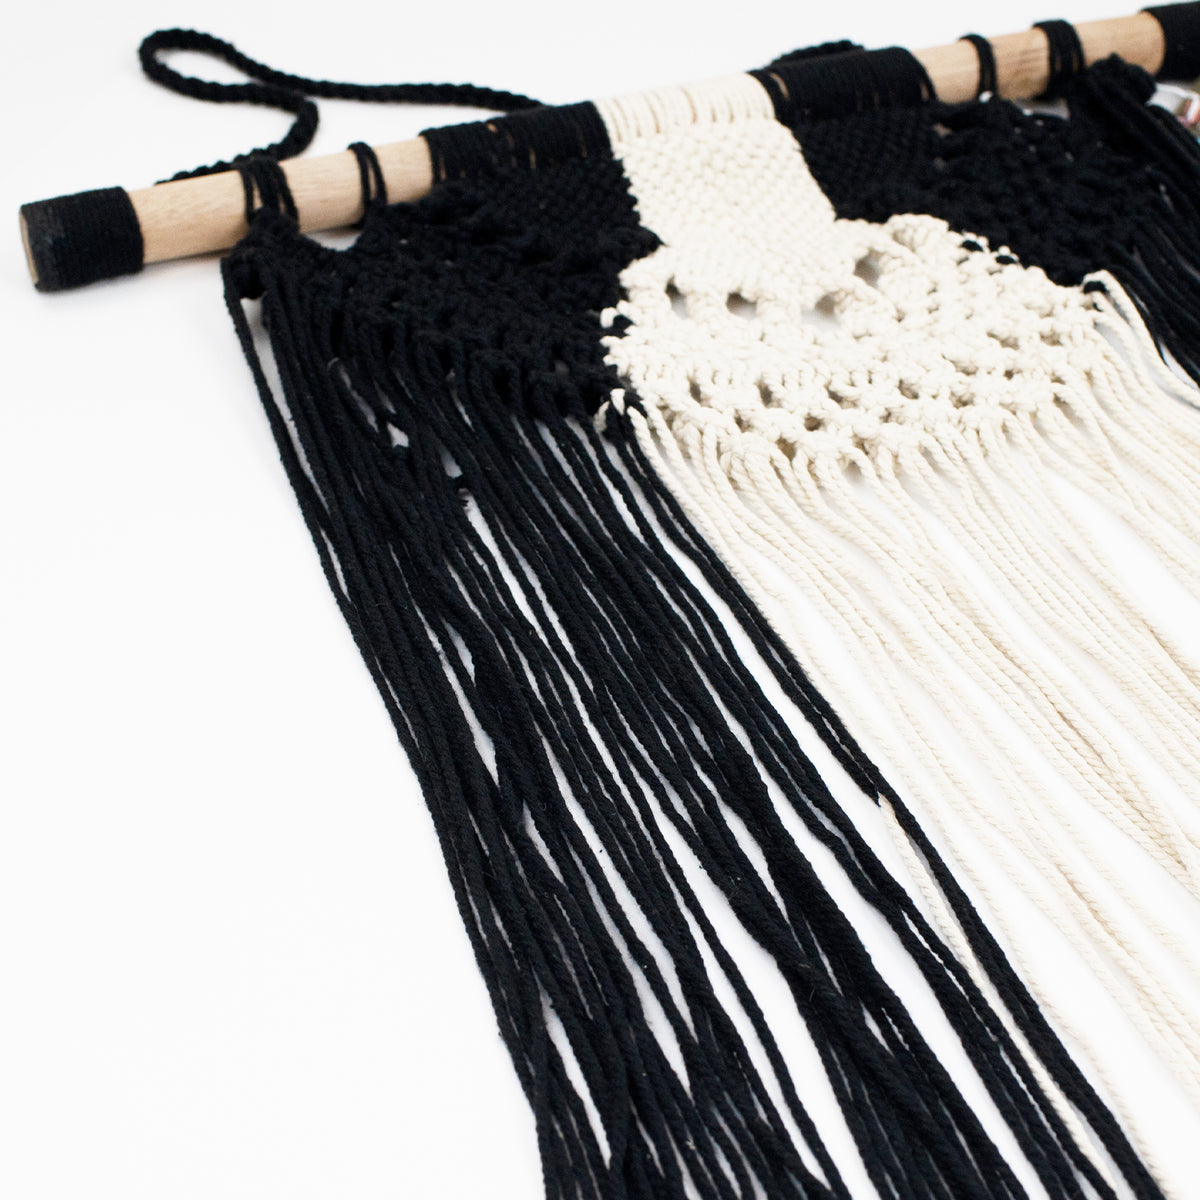 Macramé Wall Hanging with fringe - (BSH3023)